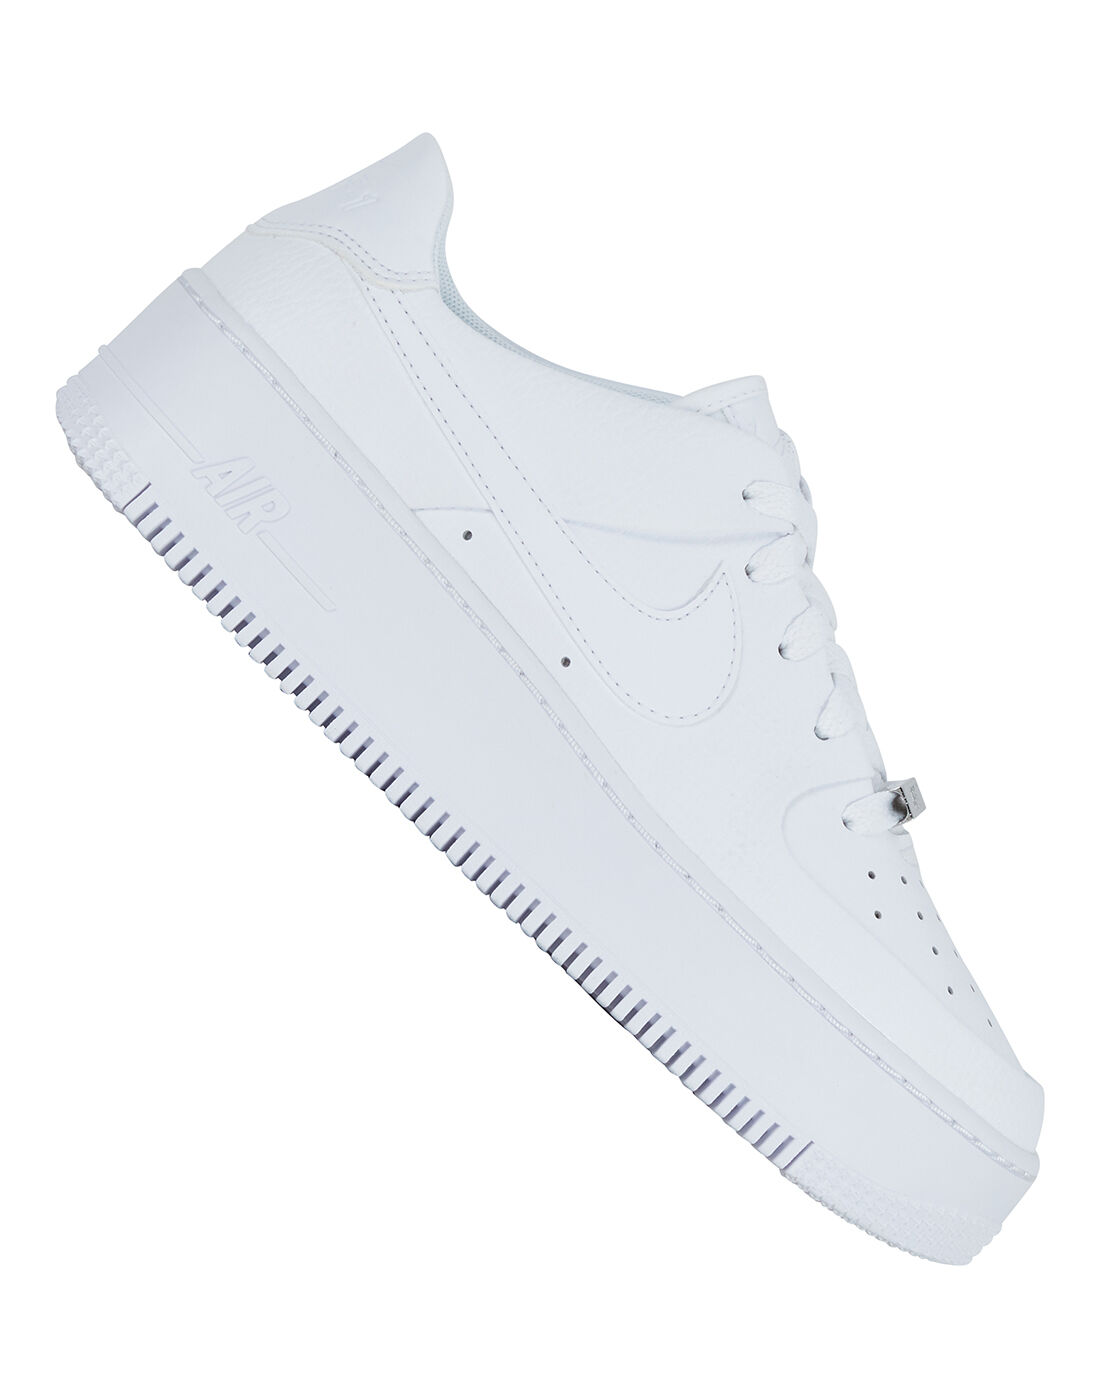 nike air force one sage low women's white